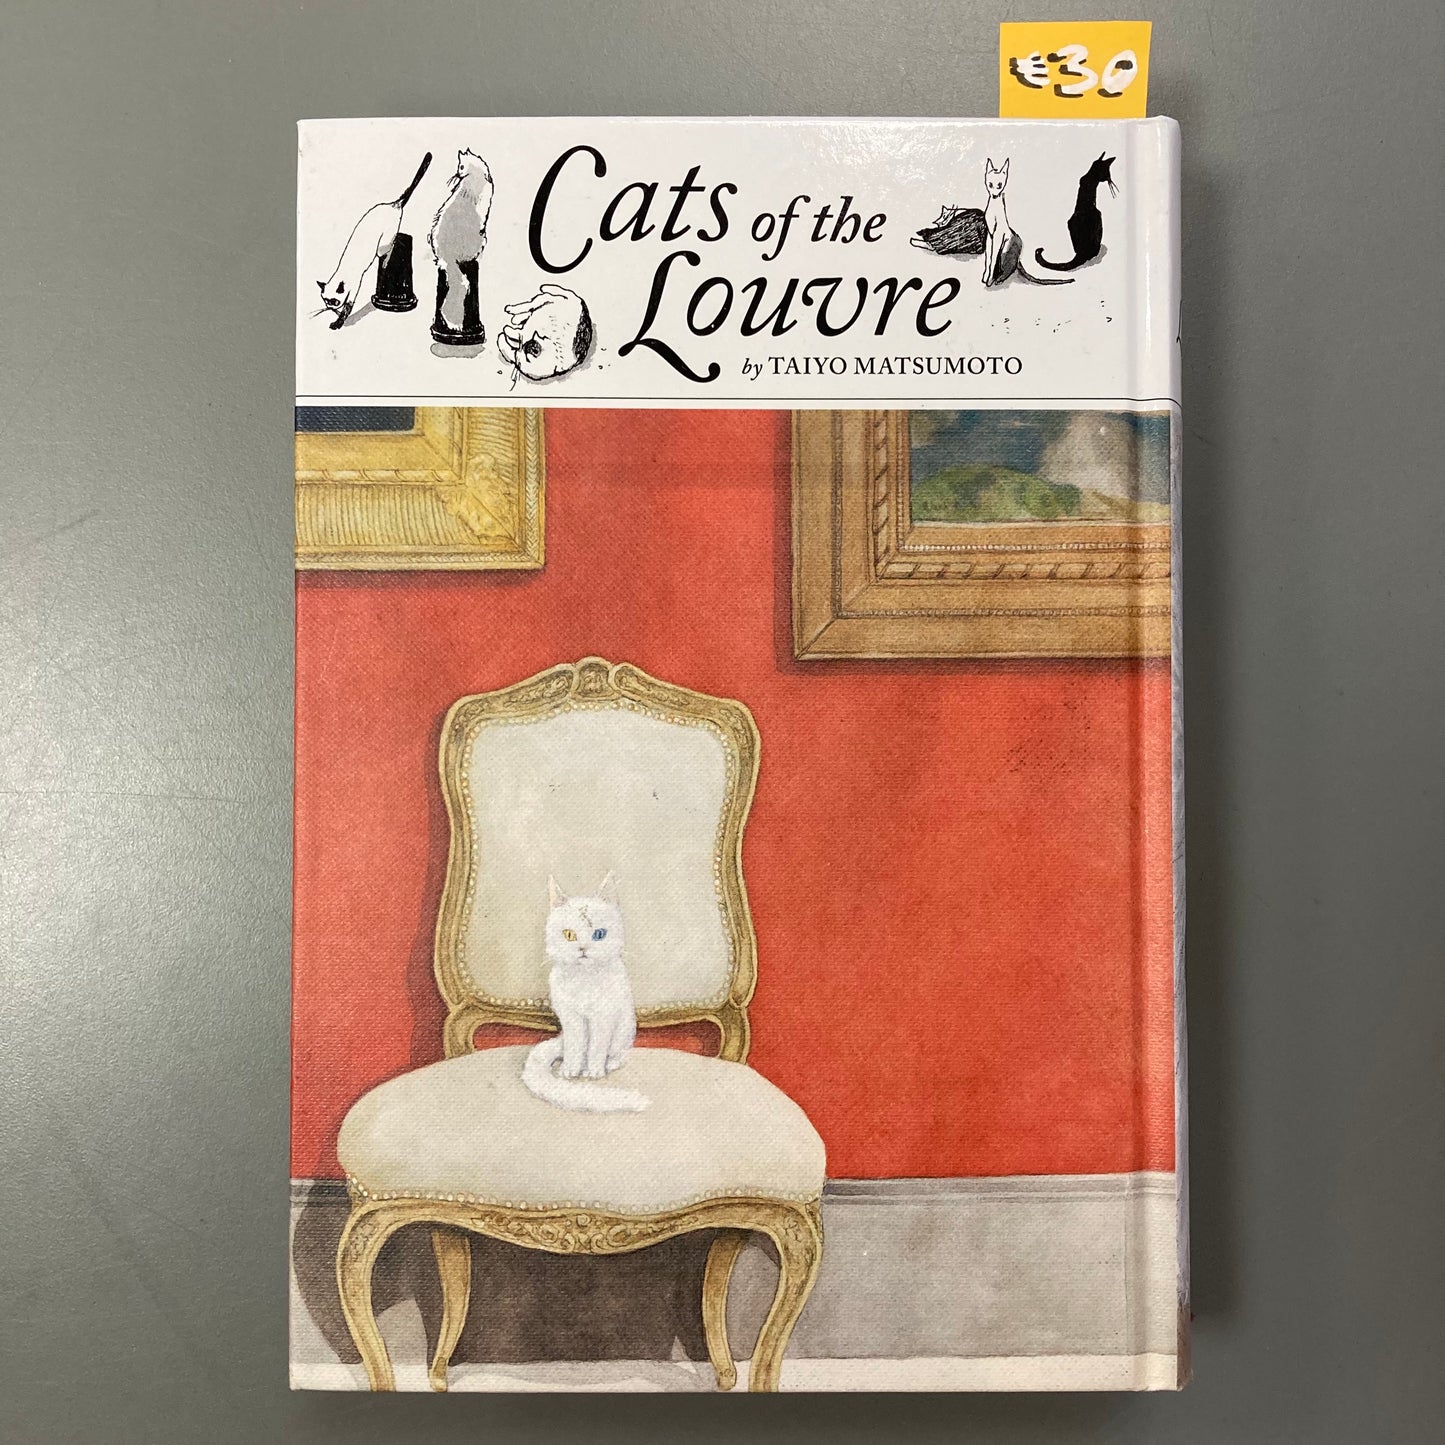 Cats of the Louvre